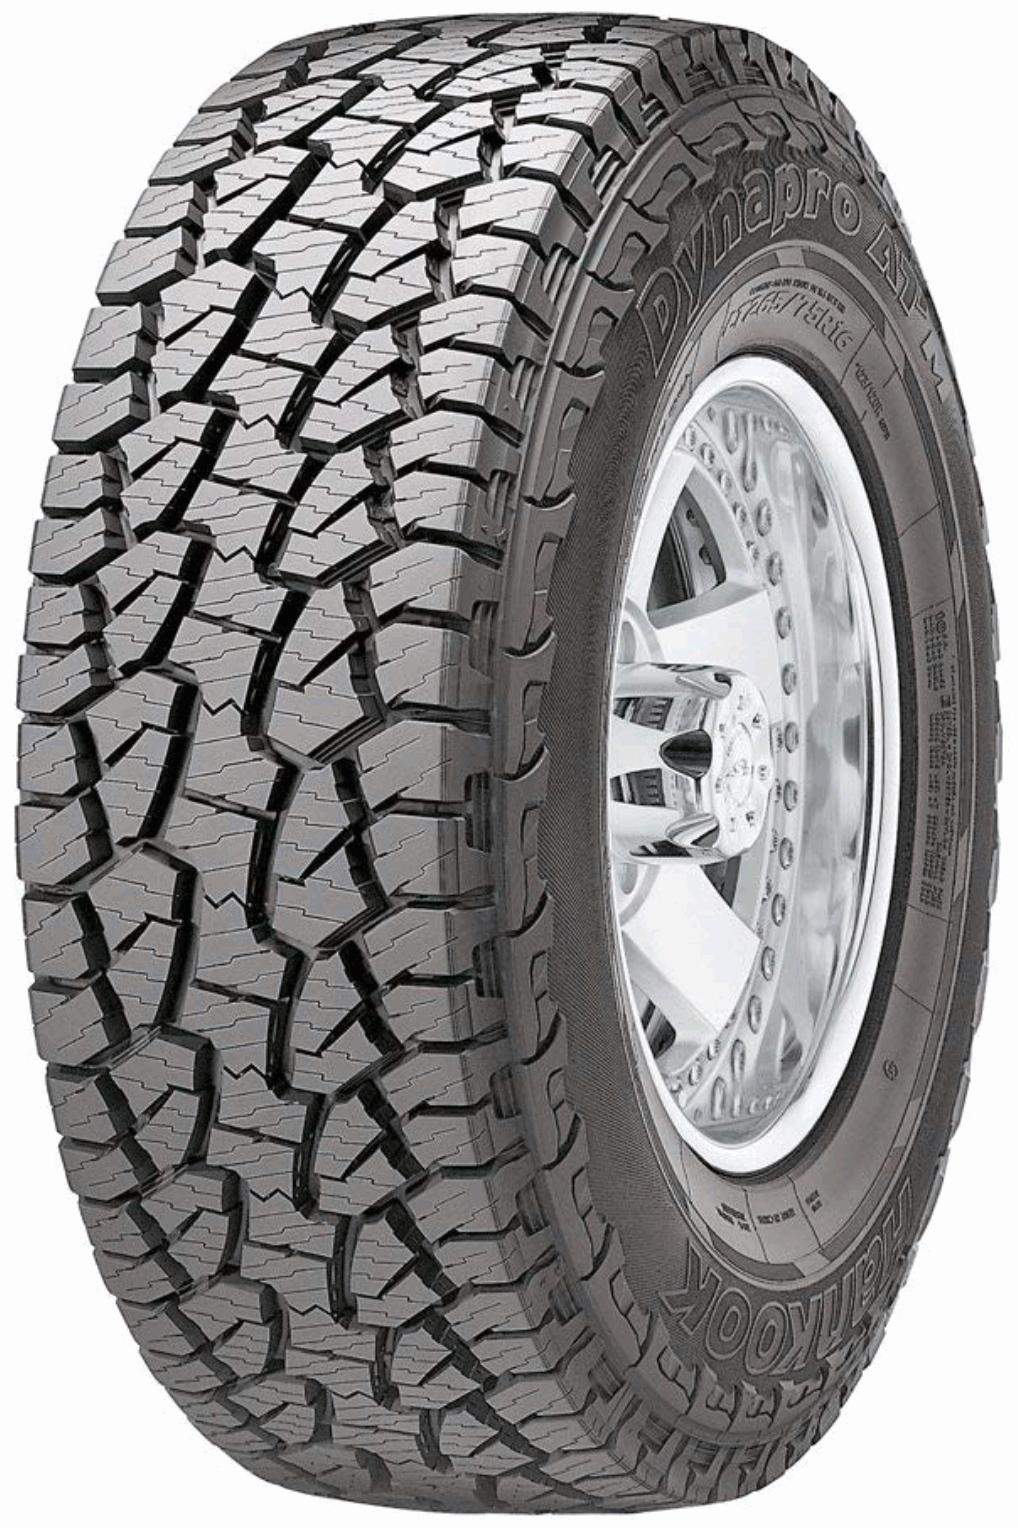 Hankook DynaPro ATM RF10 - Tire Reviews and Tests